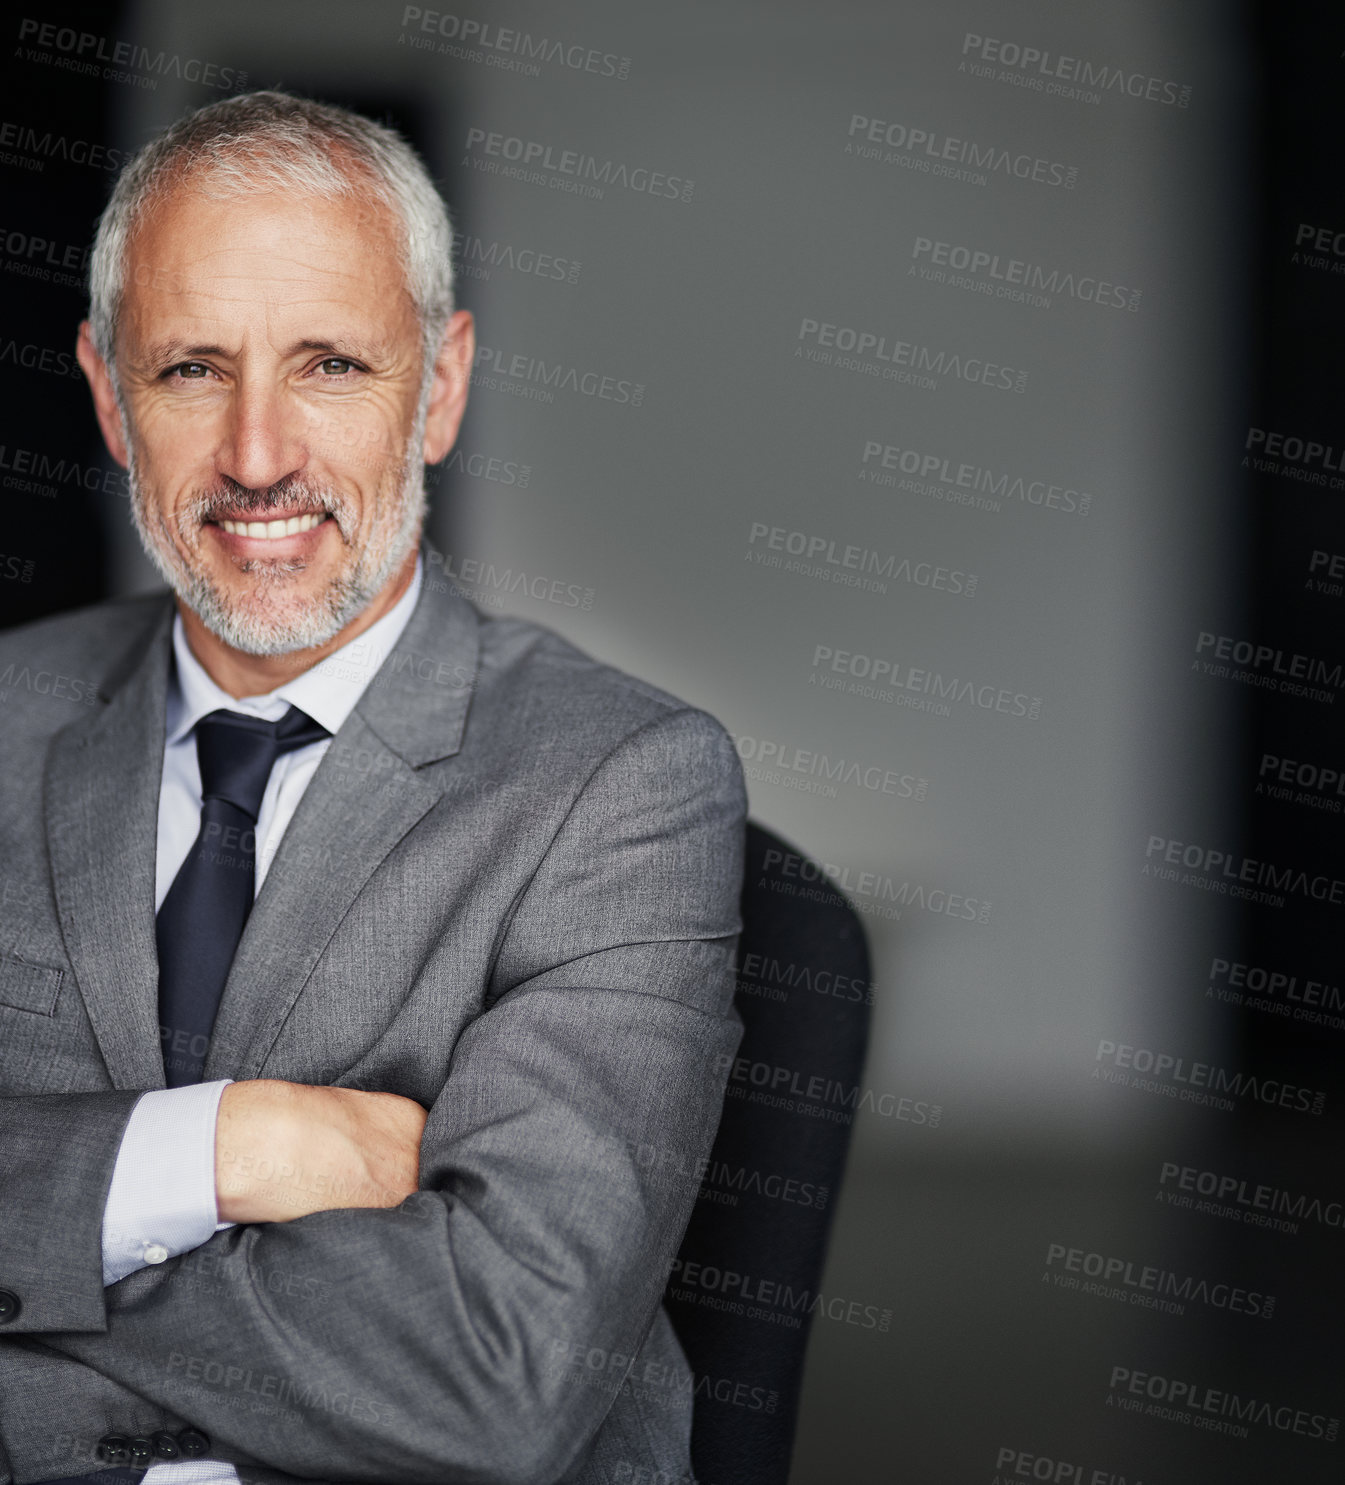 Buy stock photo Cropped portrait of a mature businessman sitting down with his arms crossed